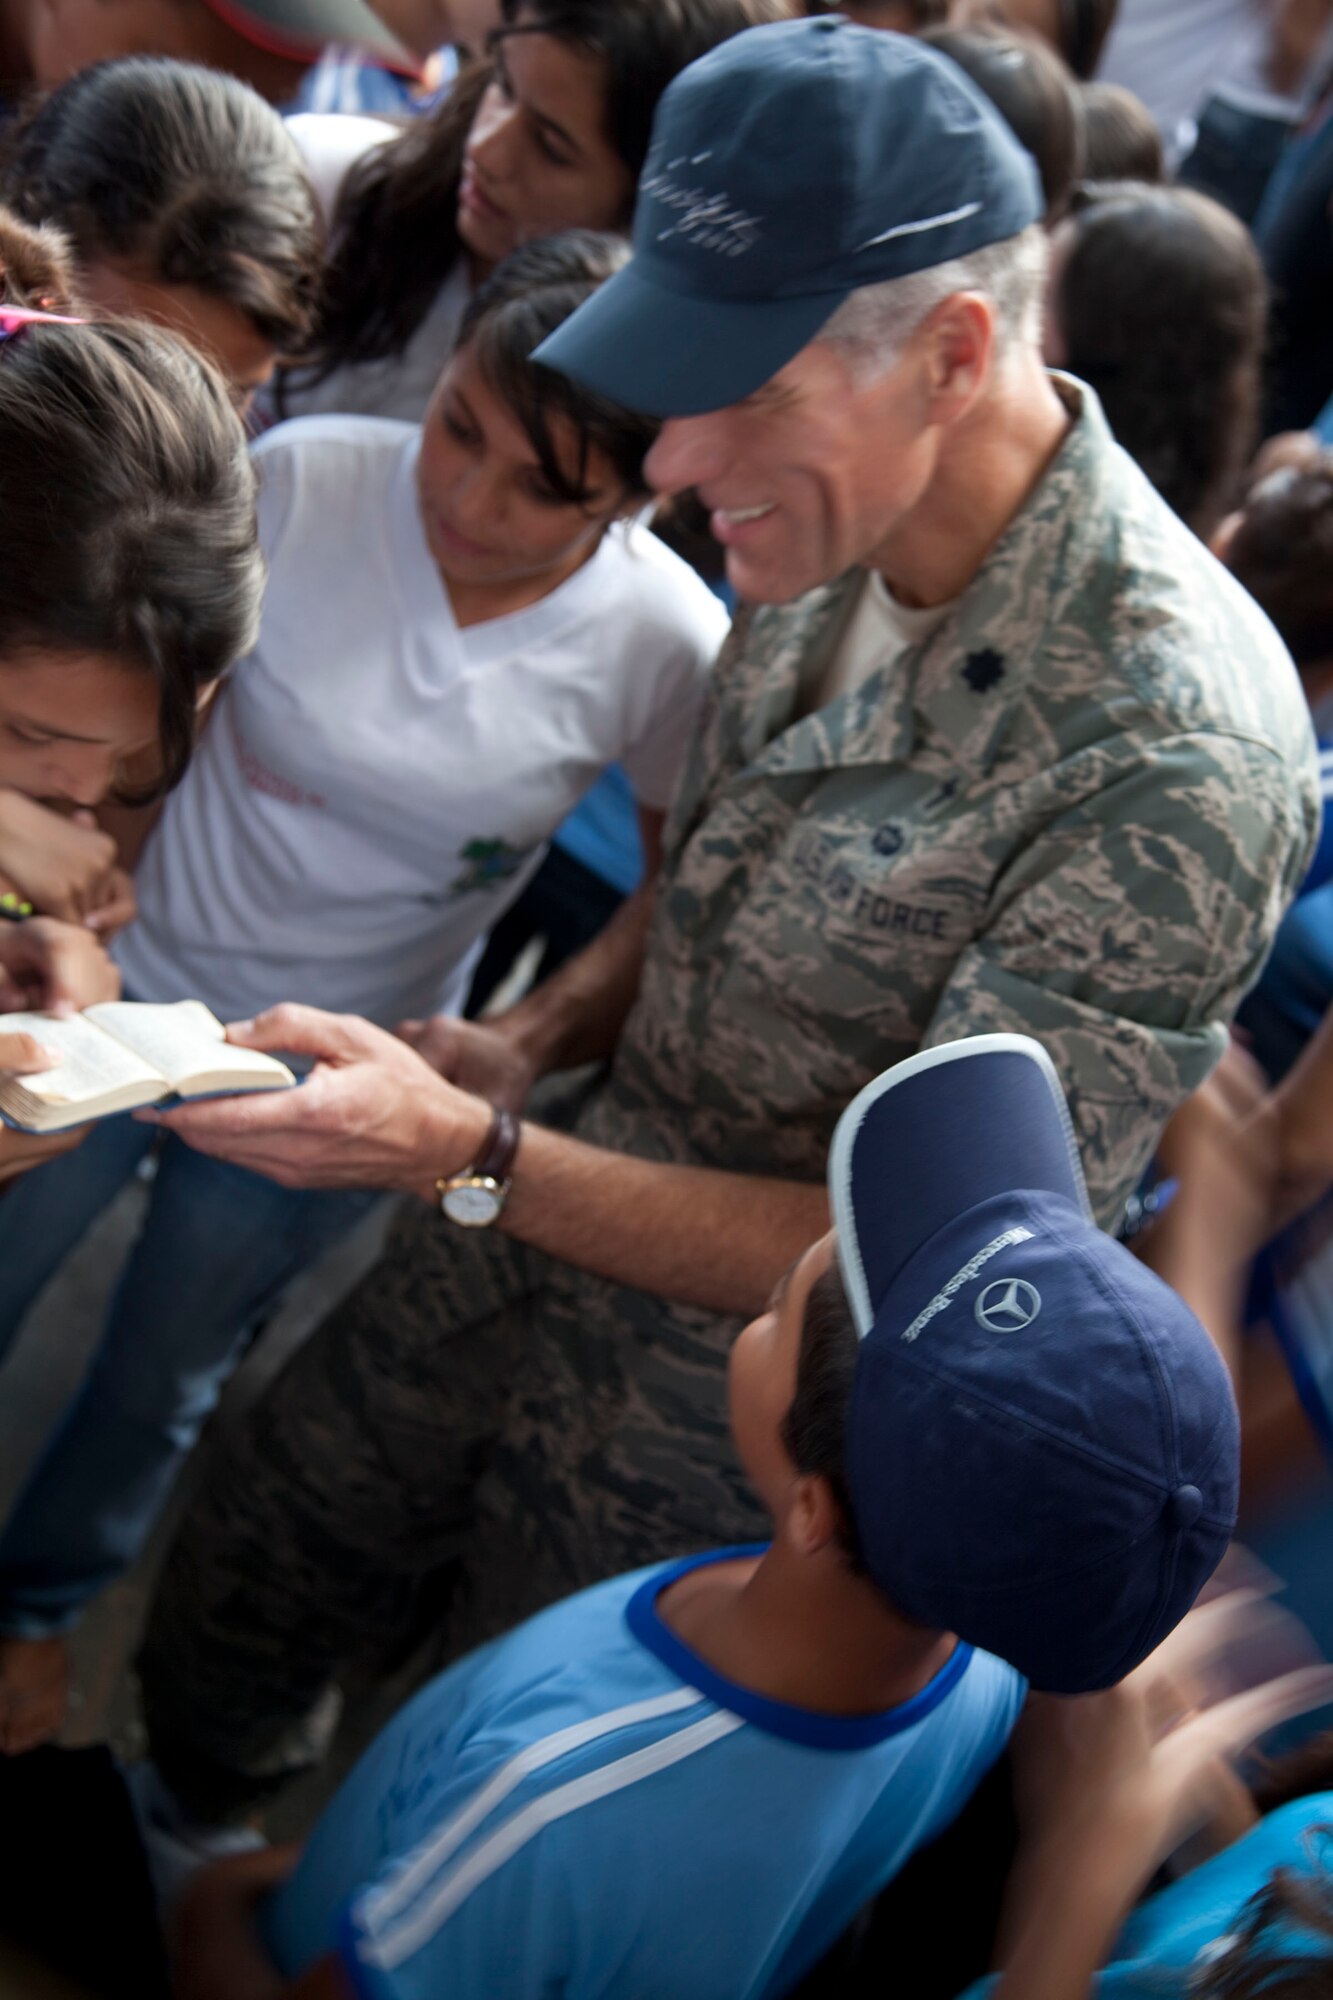 Chaplain (Lt. Col.) Ron Prosise, 140th Wing chaplain, interacts with a local student. A group of more than 15 airmen visited the local school of Eliah Maia do Rego, Natal Brazil, building community relations during CRUZEX V. During the visit the airmen interacted with the students on an informal basis; distributed small gifts and took group pictures. CRUZEX V, or Cruzeiro Do Sul (Southern Cross), is a multi-national combined exercise involving the Air Forces of Argentina, Brazil, Chile, France and Uruguay, , and observers from numerous other countries with more than 82 aircraft and almost 3,000 Airmen involved. (U.S. Air Force photo/Staff Sgt. Michael Matkin)